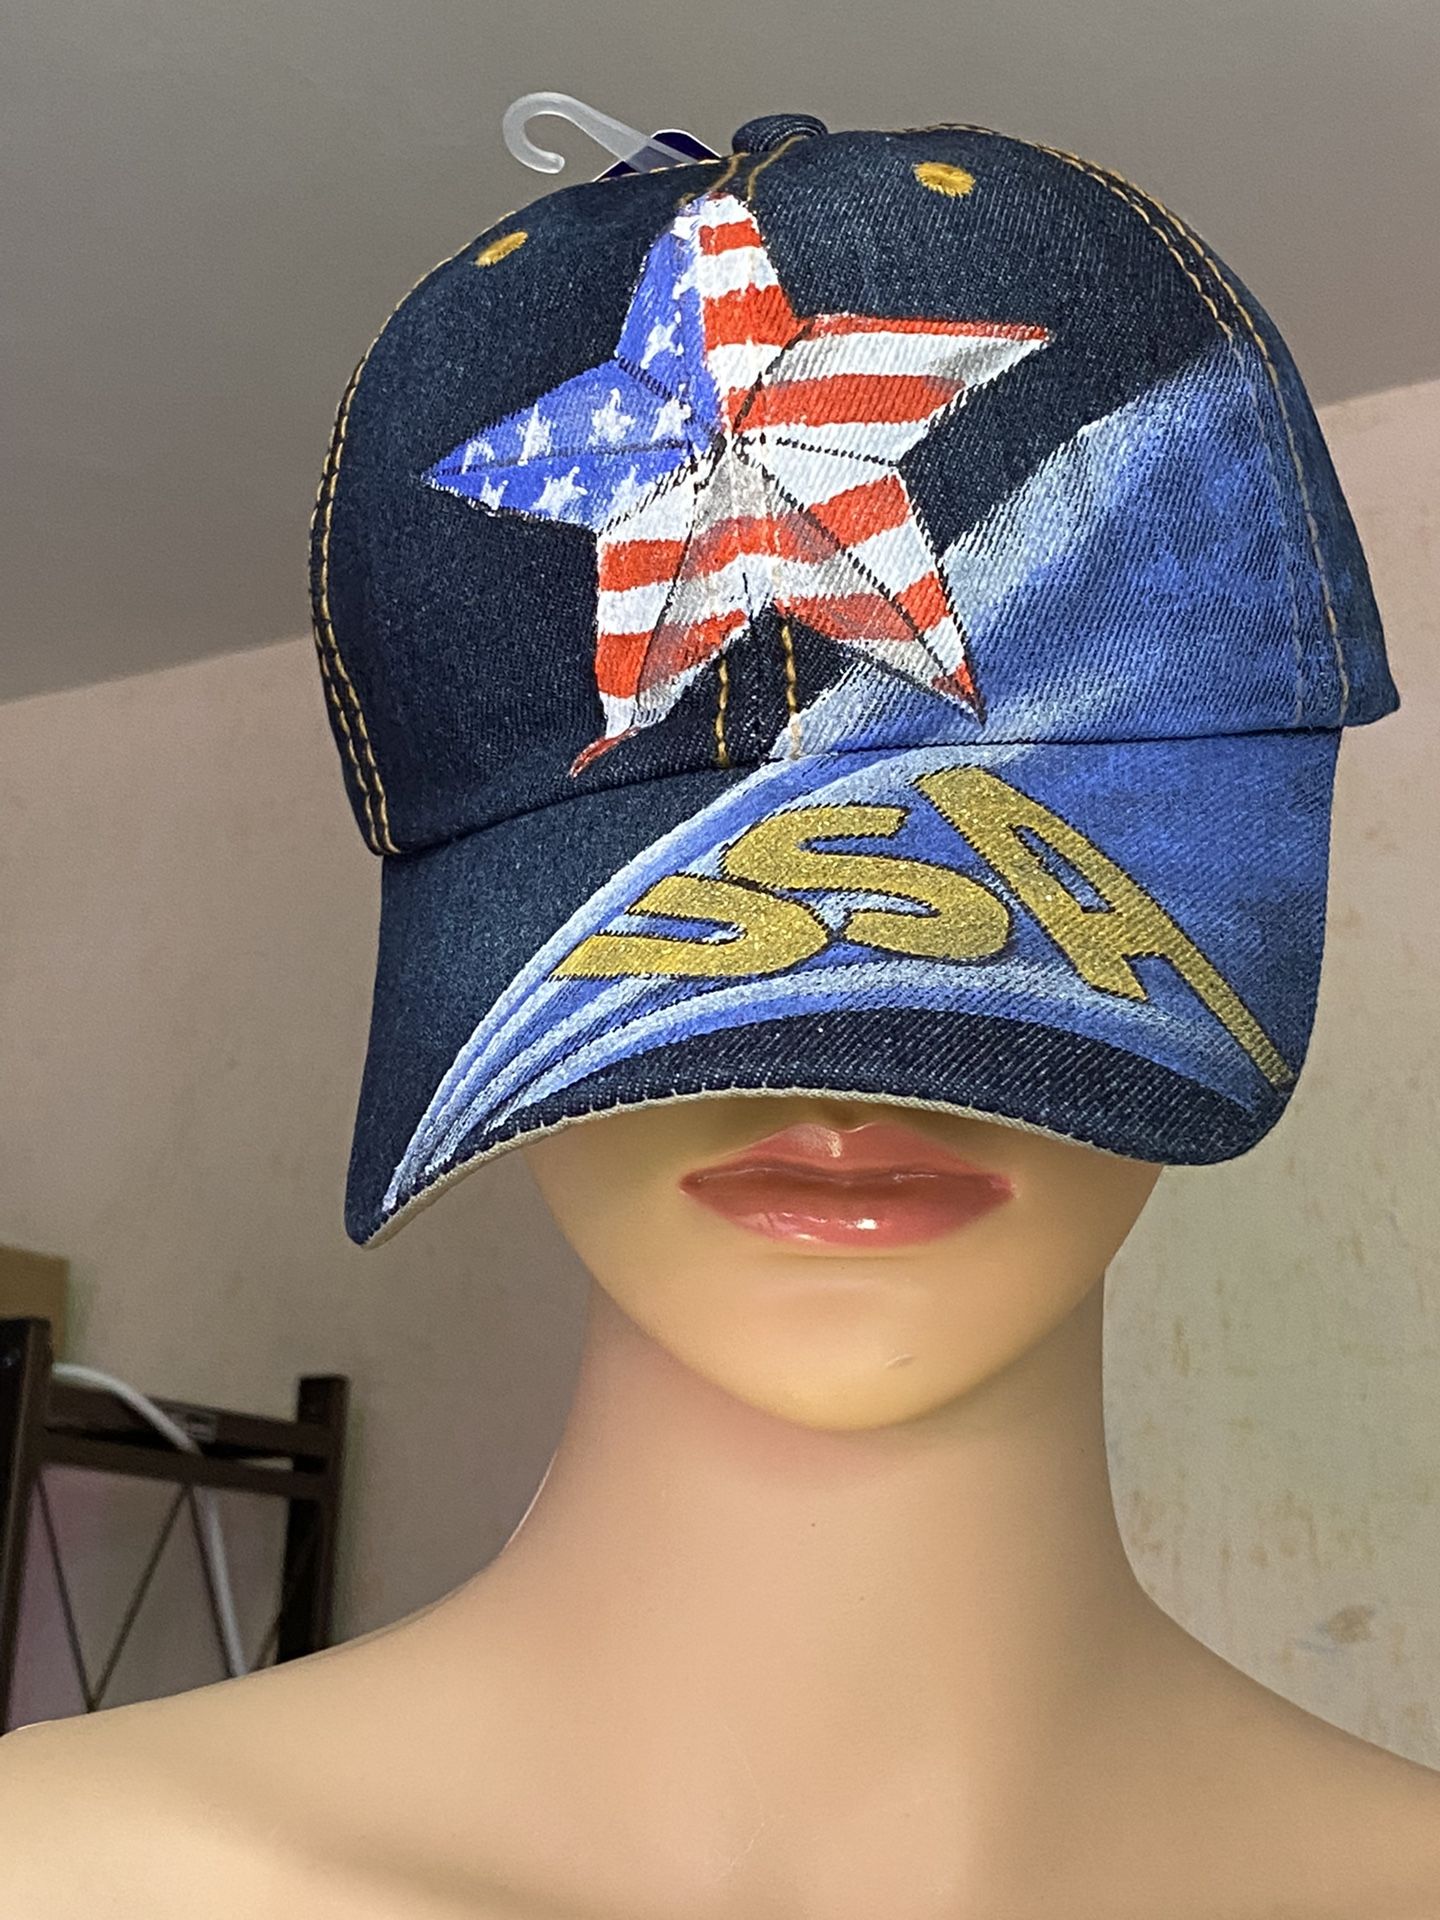 STYLE #11-STAR USA FLAG. CUTE HAT W/SEMI-BLING. SHINES IN THE LIGHT.